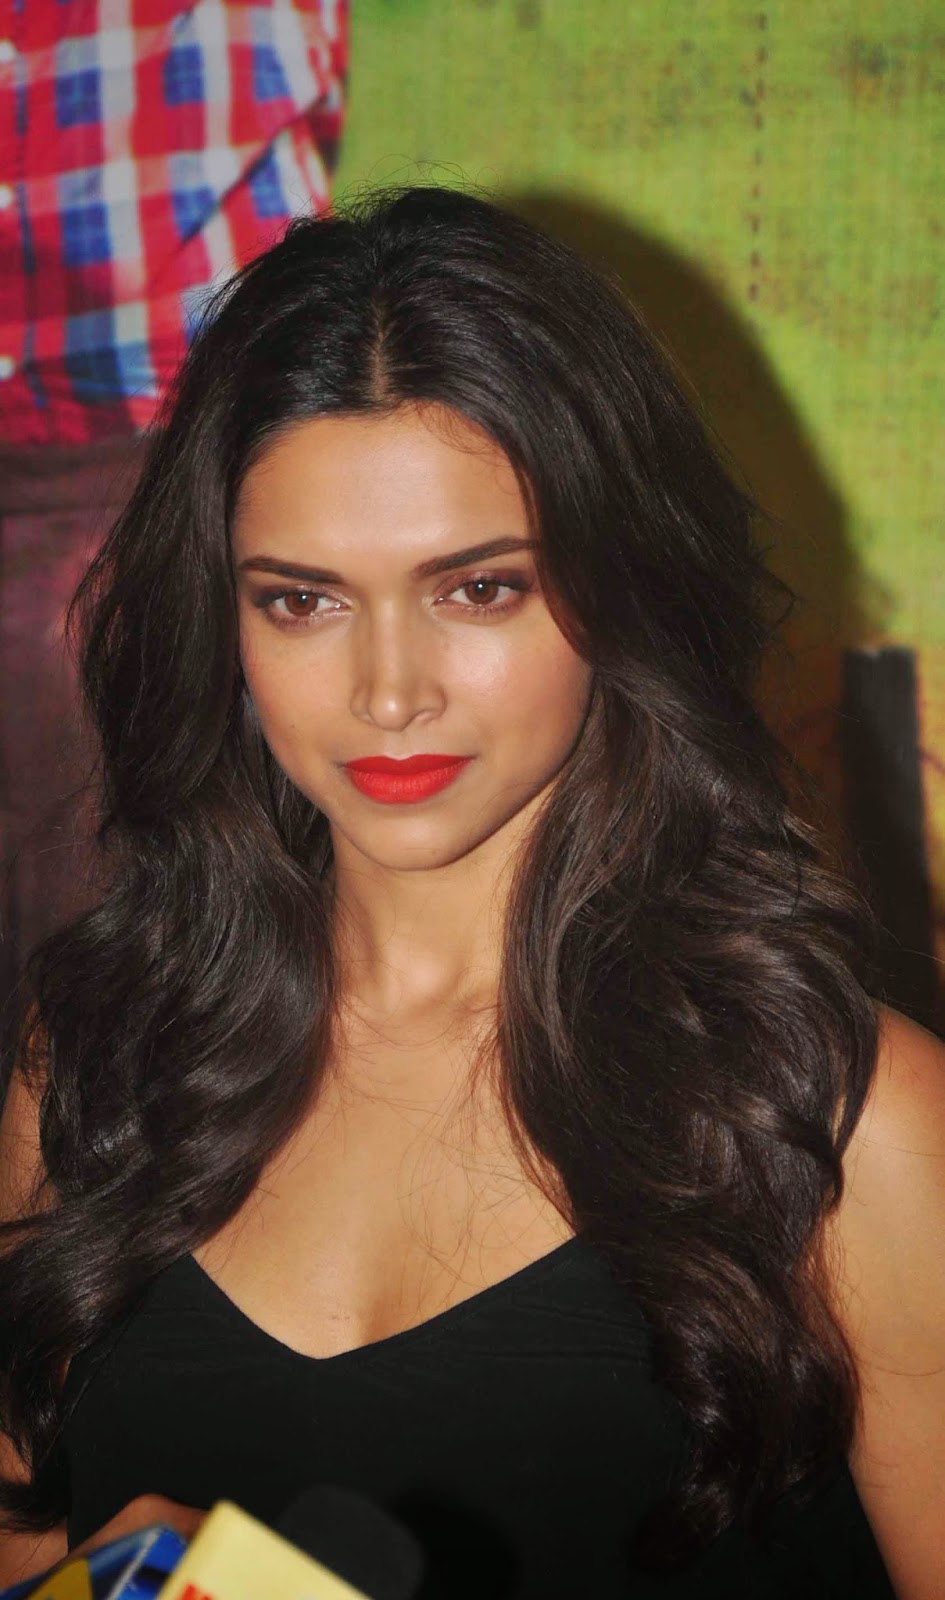 High Quality Bollywood Celebrity Pictures Deepika